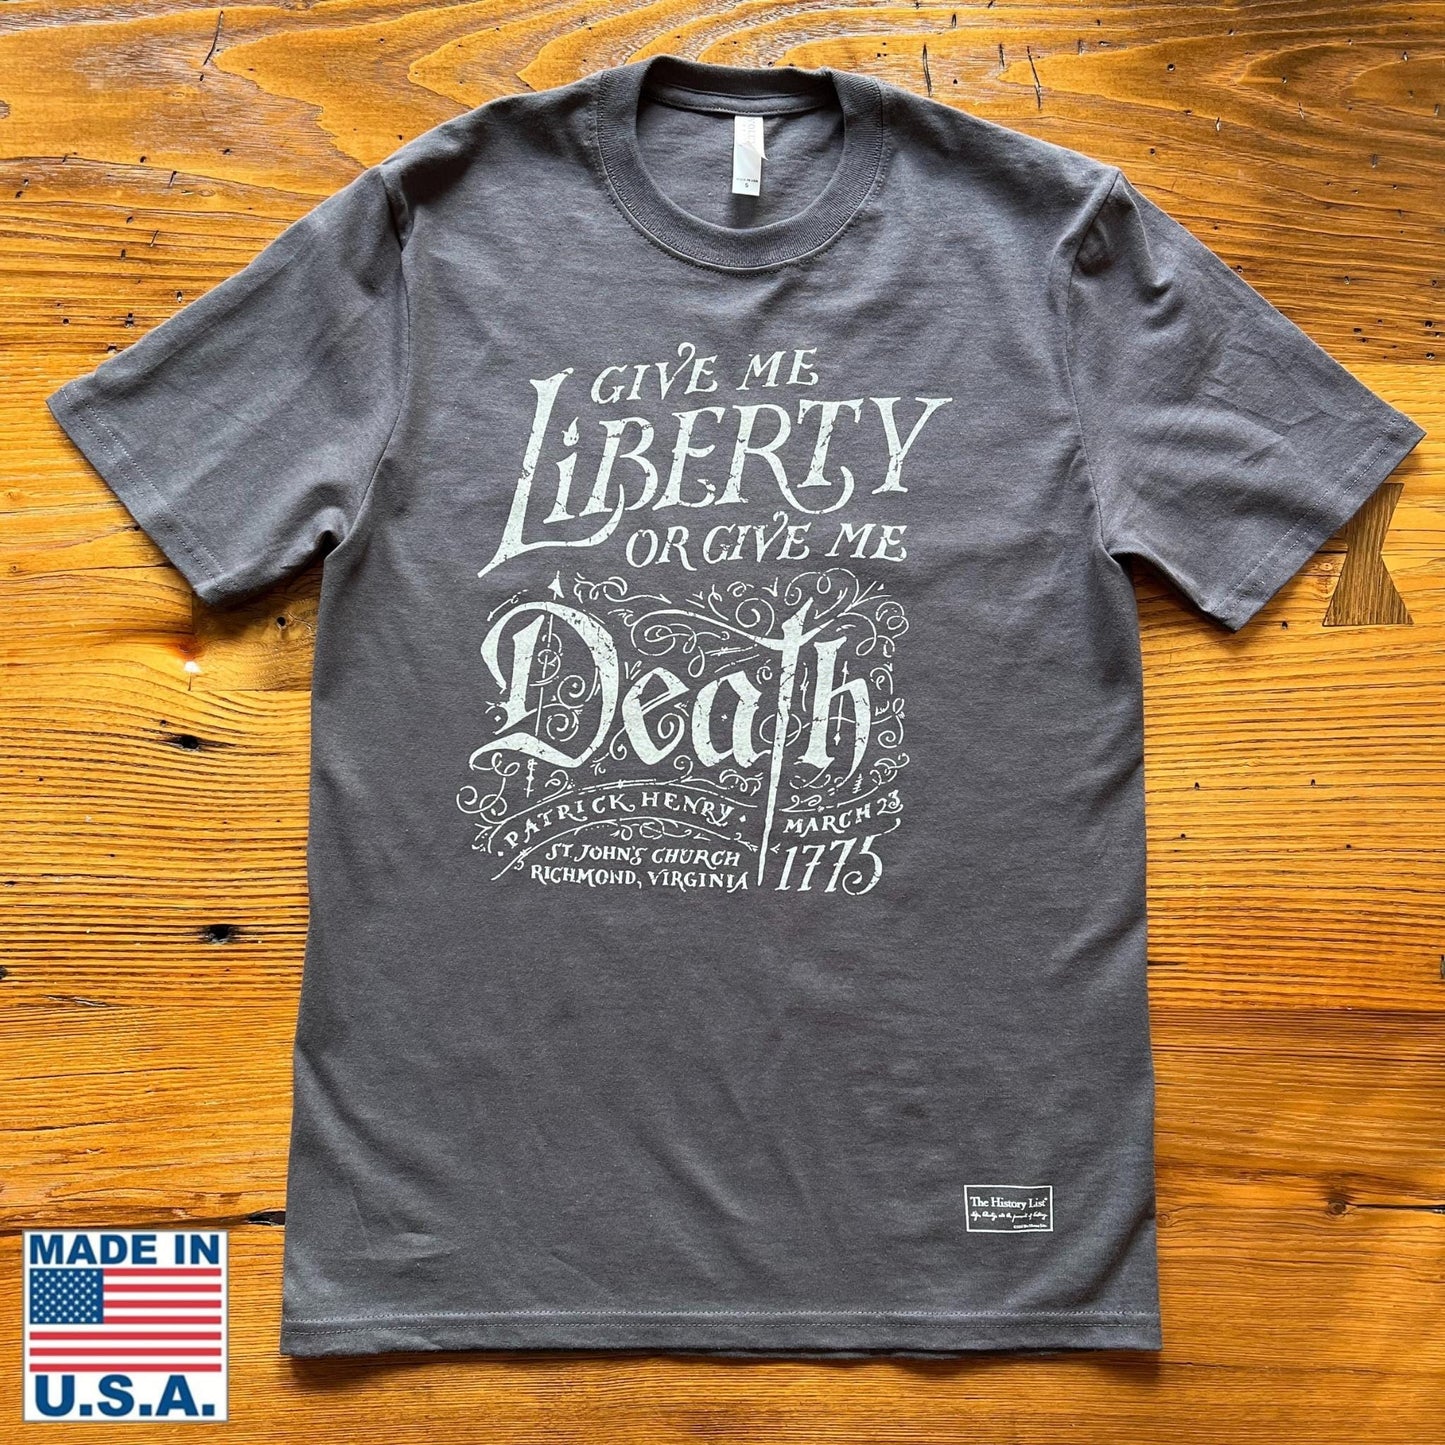 "Give me liberty, or give me death!" Shirt from the history list store